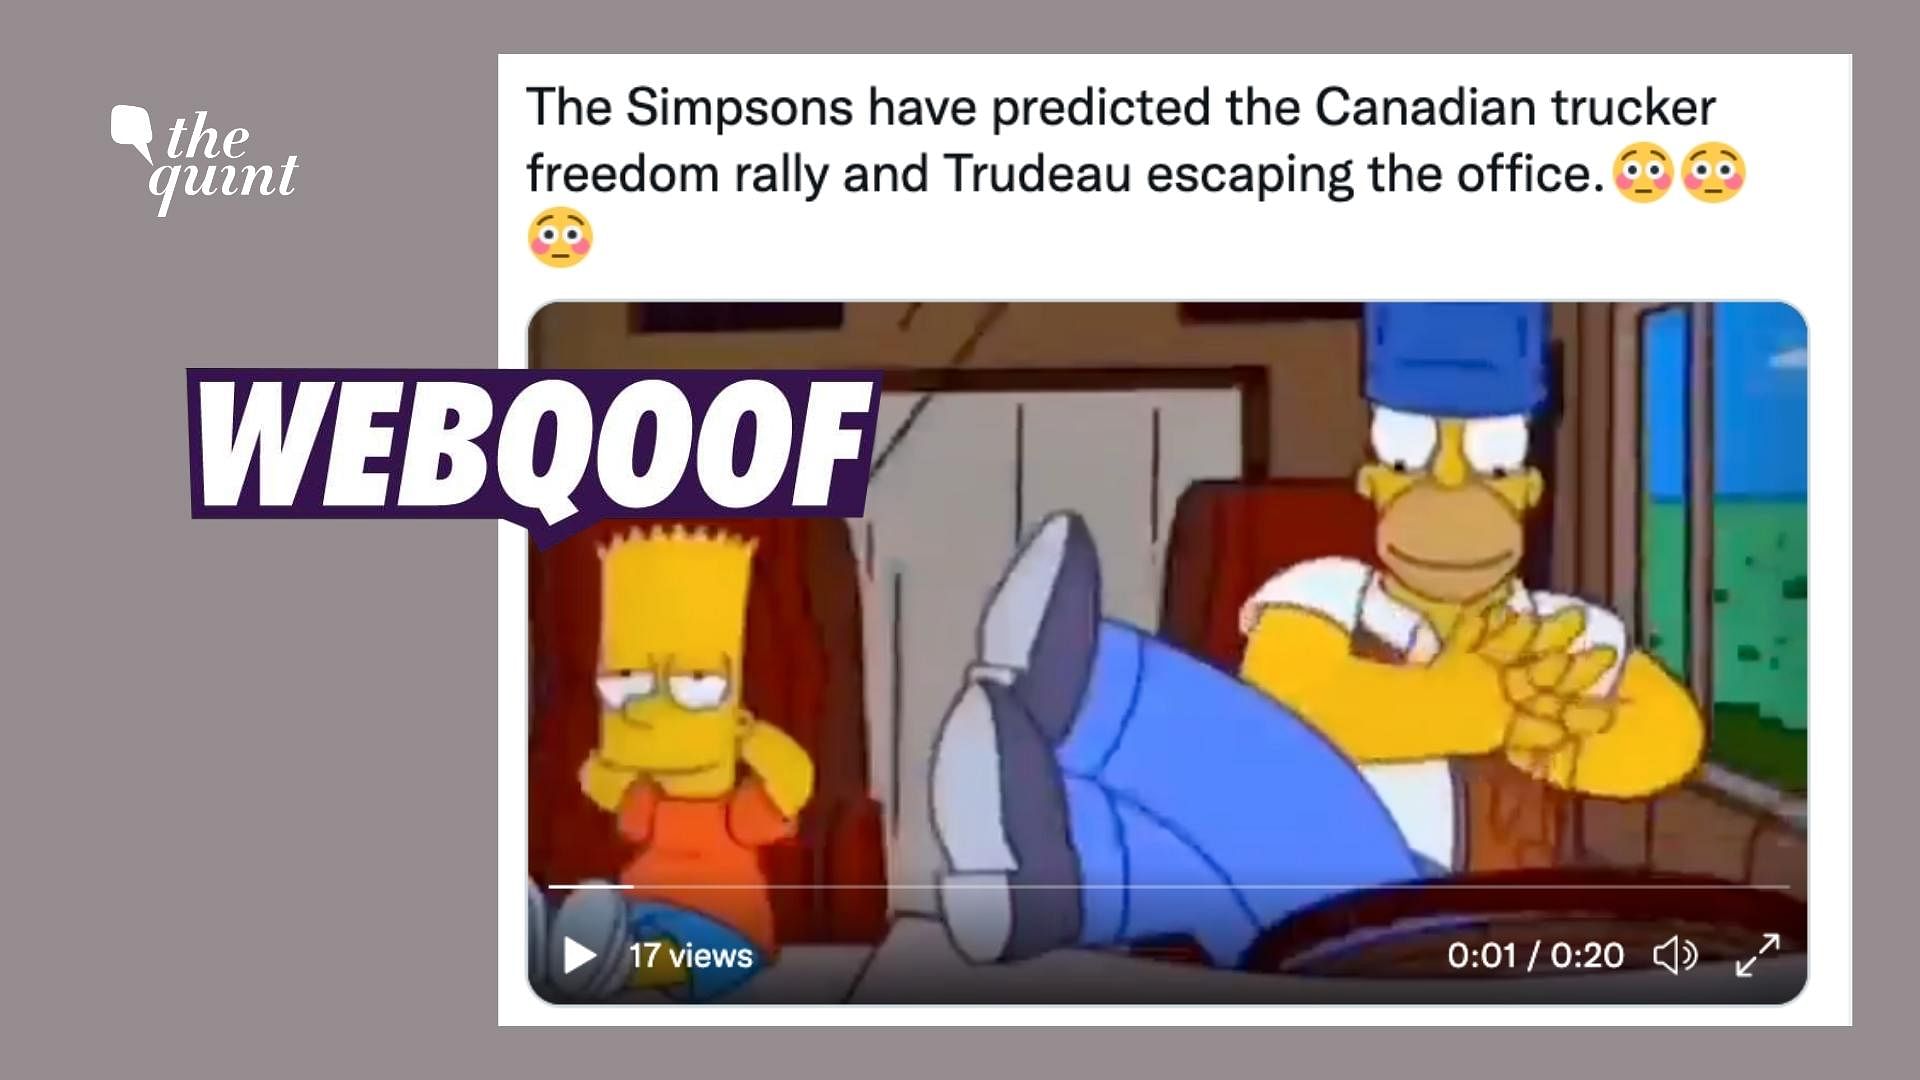 <div class="paragraphs"><p>The video claims that 'The Simpsons' show had predicted the truckers' anti-vaccination protest in Ottawa, Canada.</p></div>